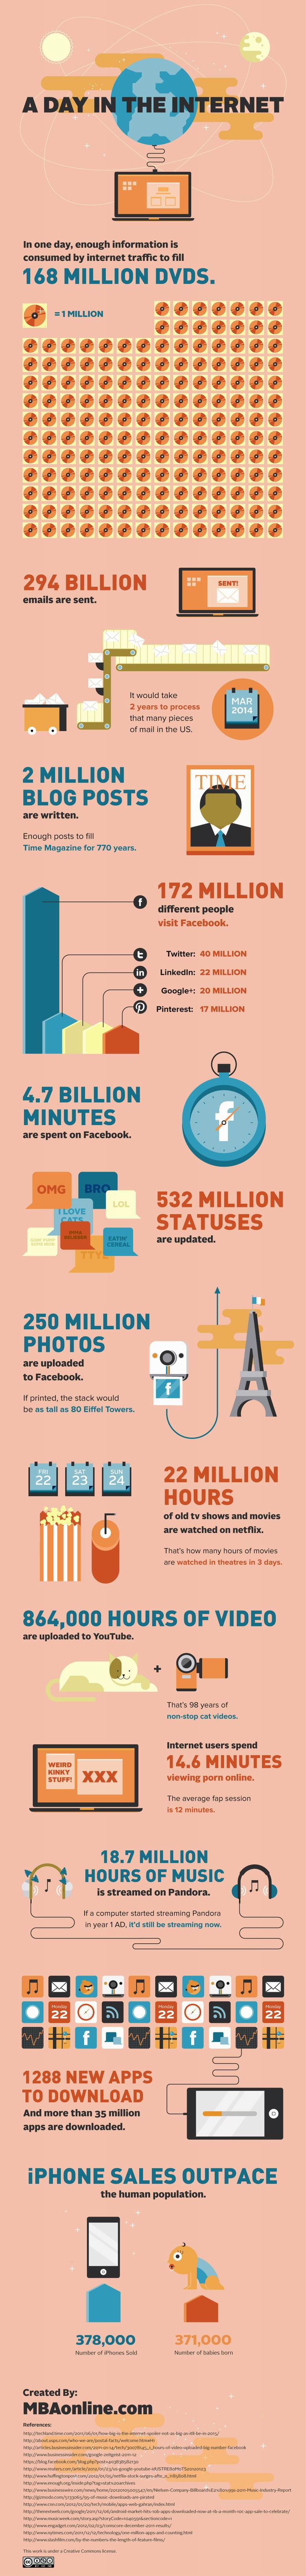 A Day In The Life Of The Internet [INFOGRAPHIC]